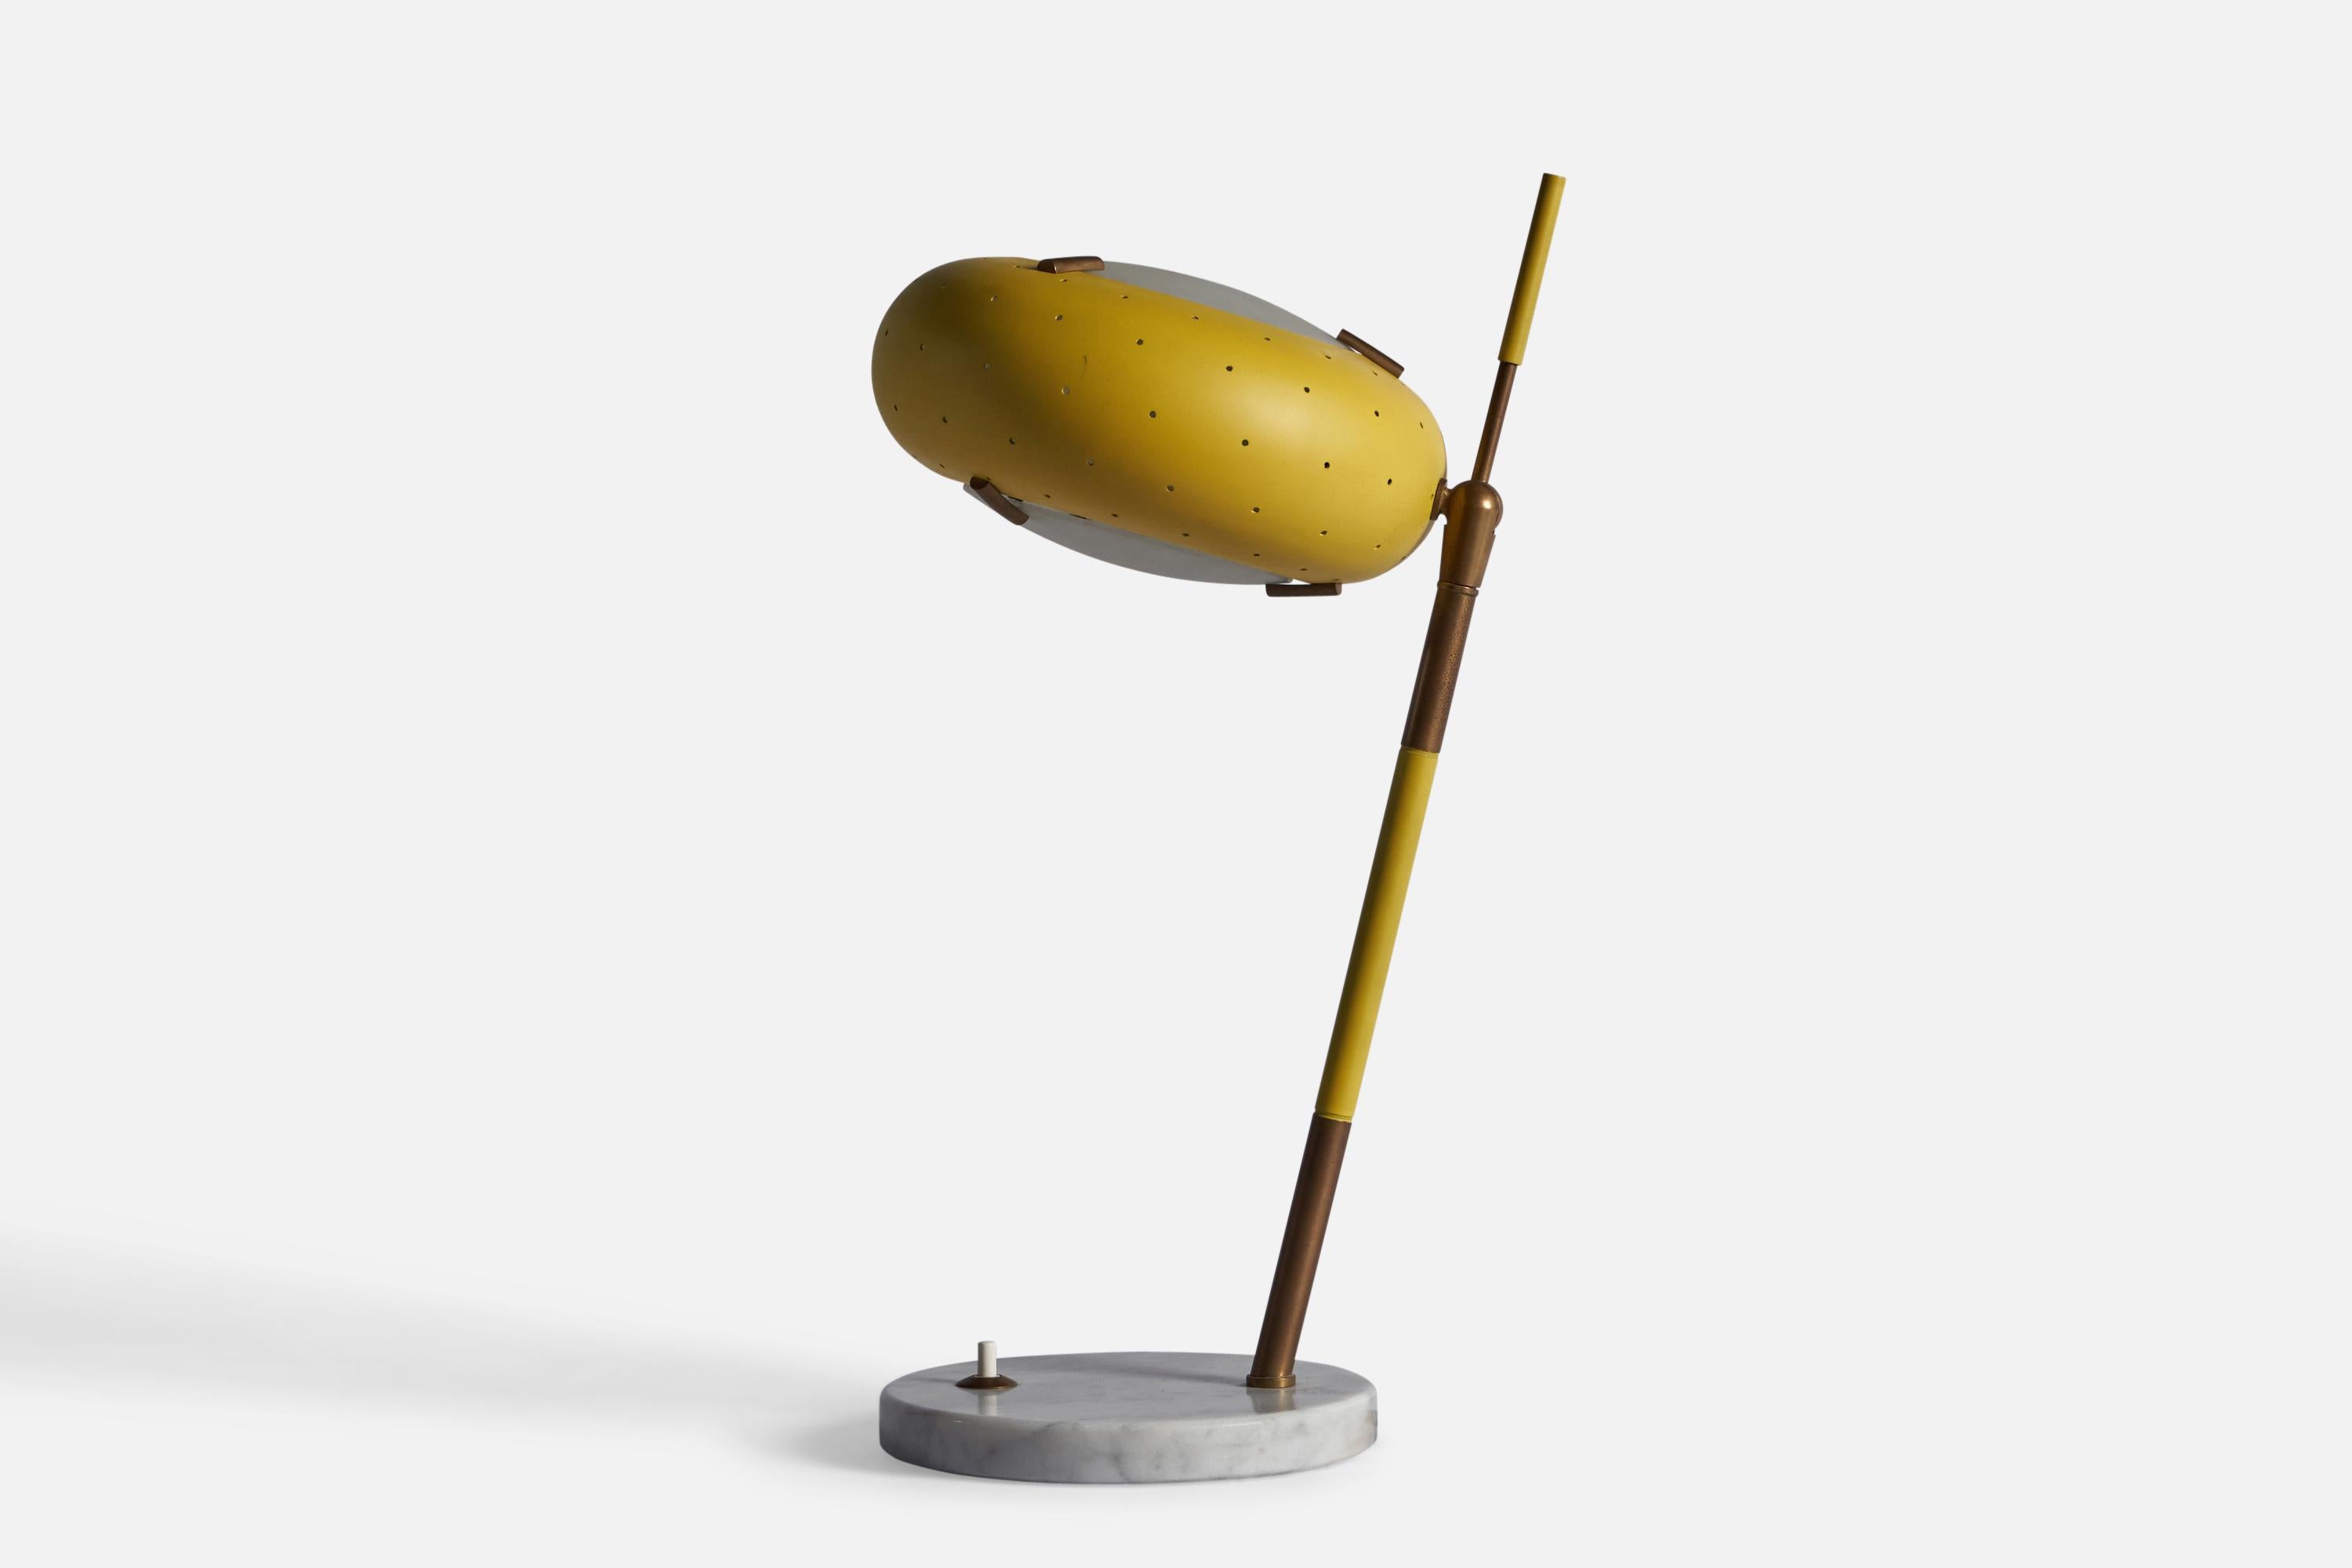 An adjustable brass, Carrara marble, glass and yellow-lacquered metal table lamp, designed and produced by Stilux Milano, c. 1950s

Overall Dimensions: 16